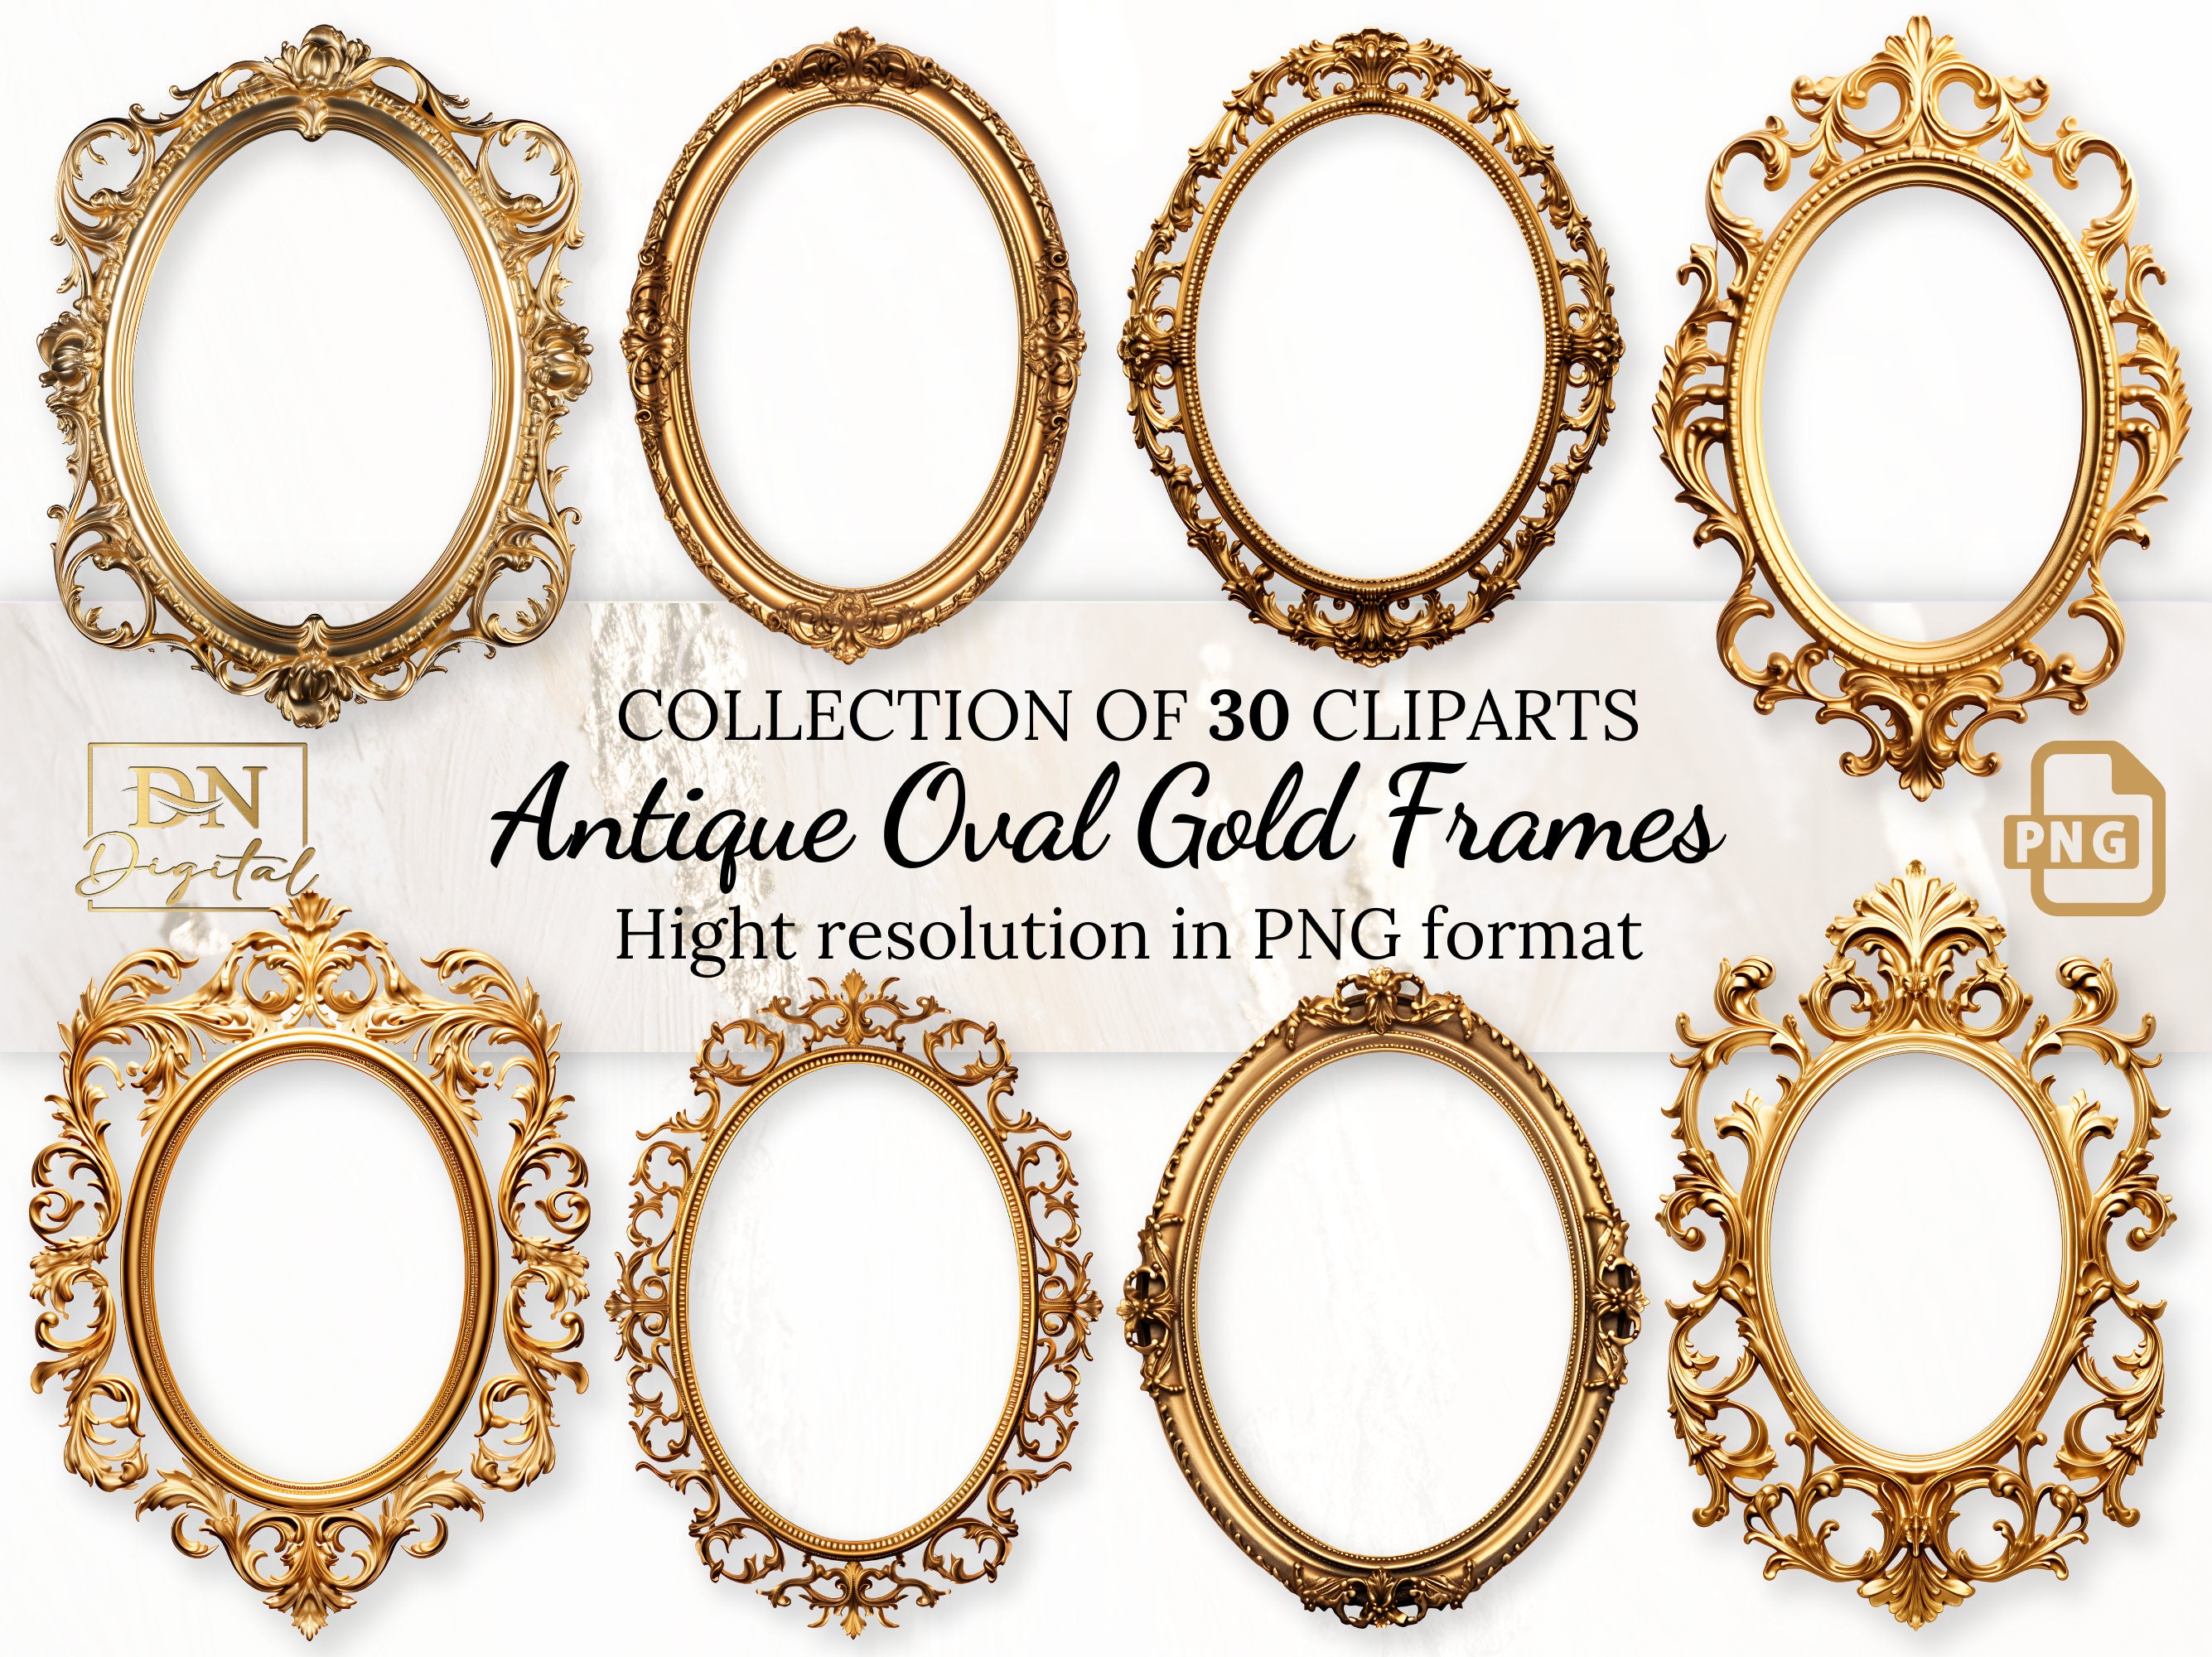 CustomPictureFrames.com 7x25 Frame Gold Real Wood Picture Frame Width 1.75 Inches | Interior Frame Depth 0.5 Inches | Museum Gold Ornate Photo Frame